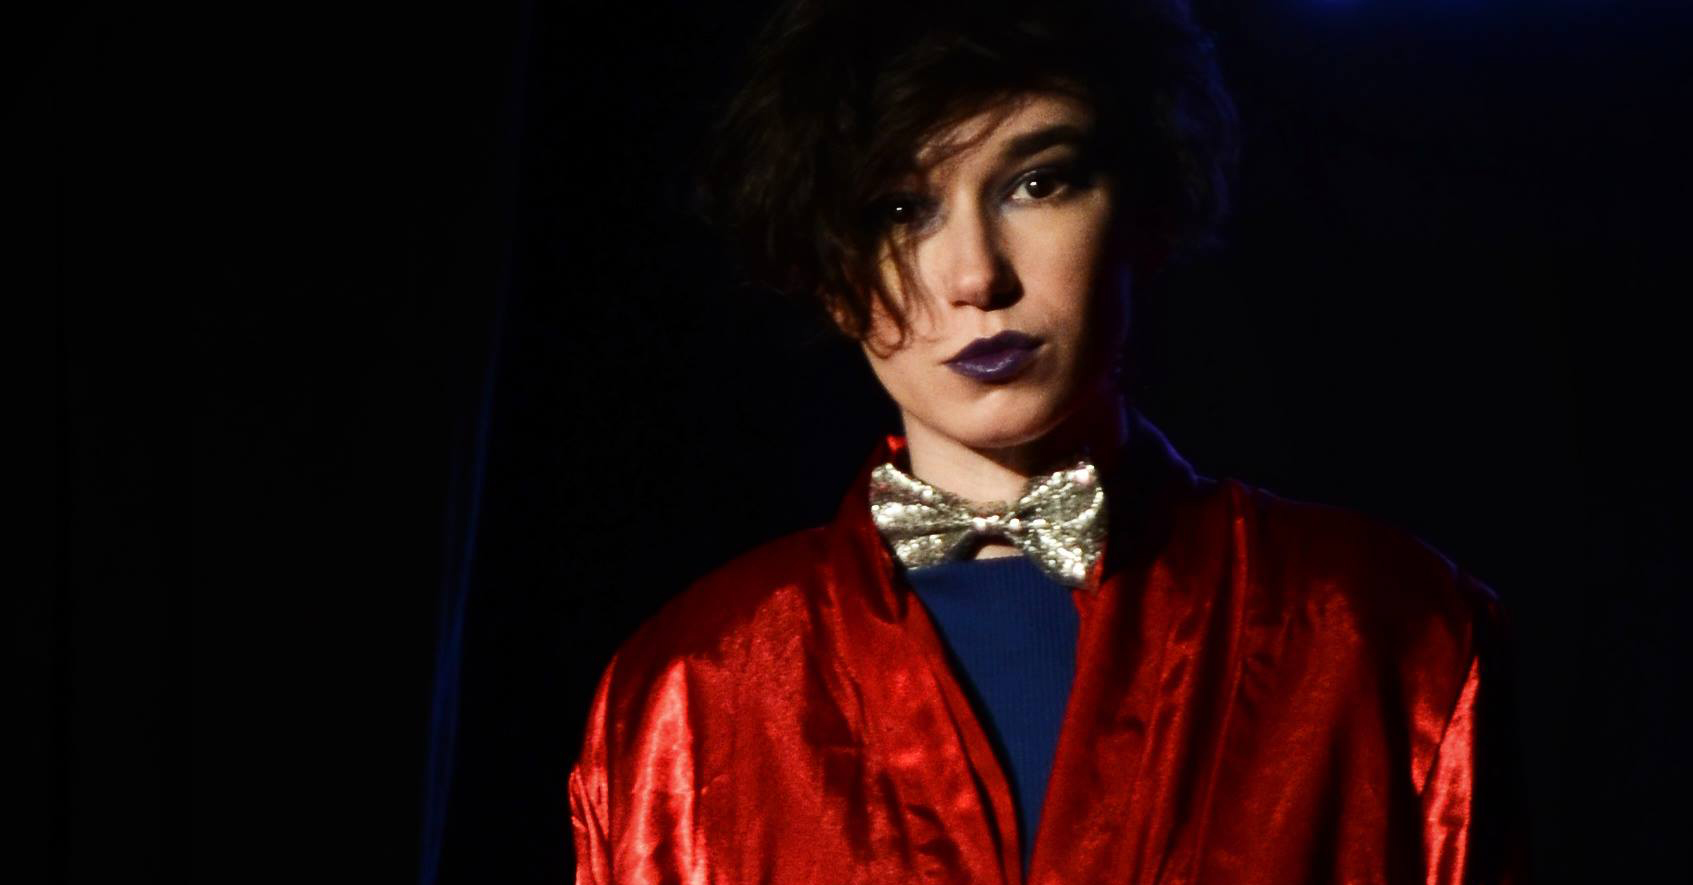 A woman in a dark red coat, blue shirt and dark lipstick posing as the role of a prince for an opera